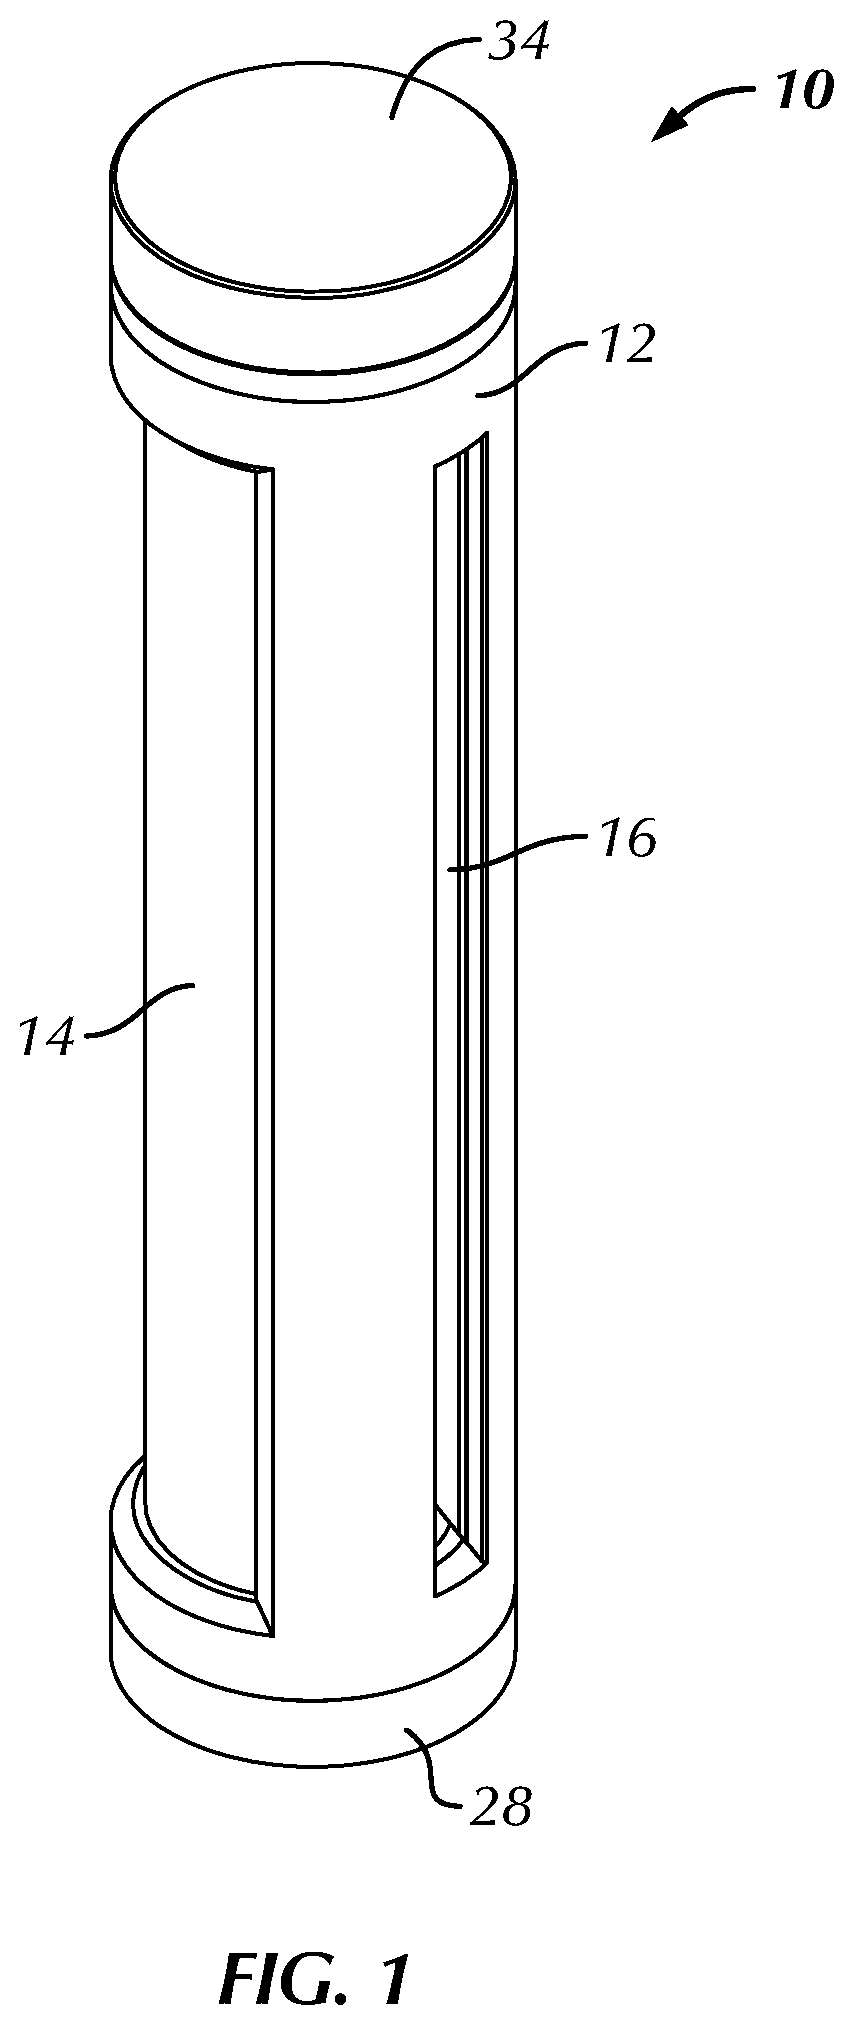 Apparatus for Rolling or Wrapping Materials Within an Elongated Wrapper, and Associated Accessories